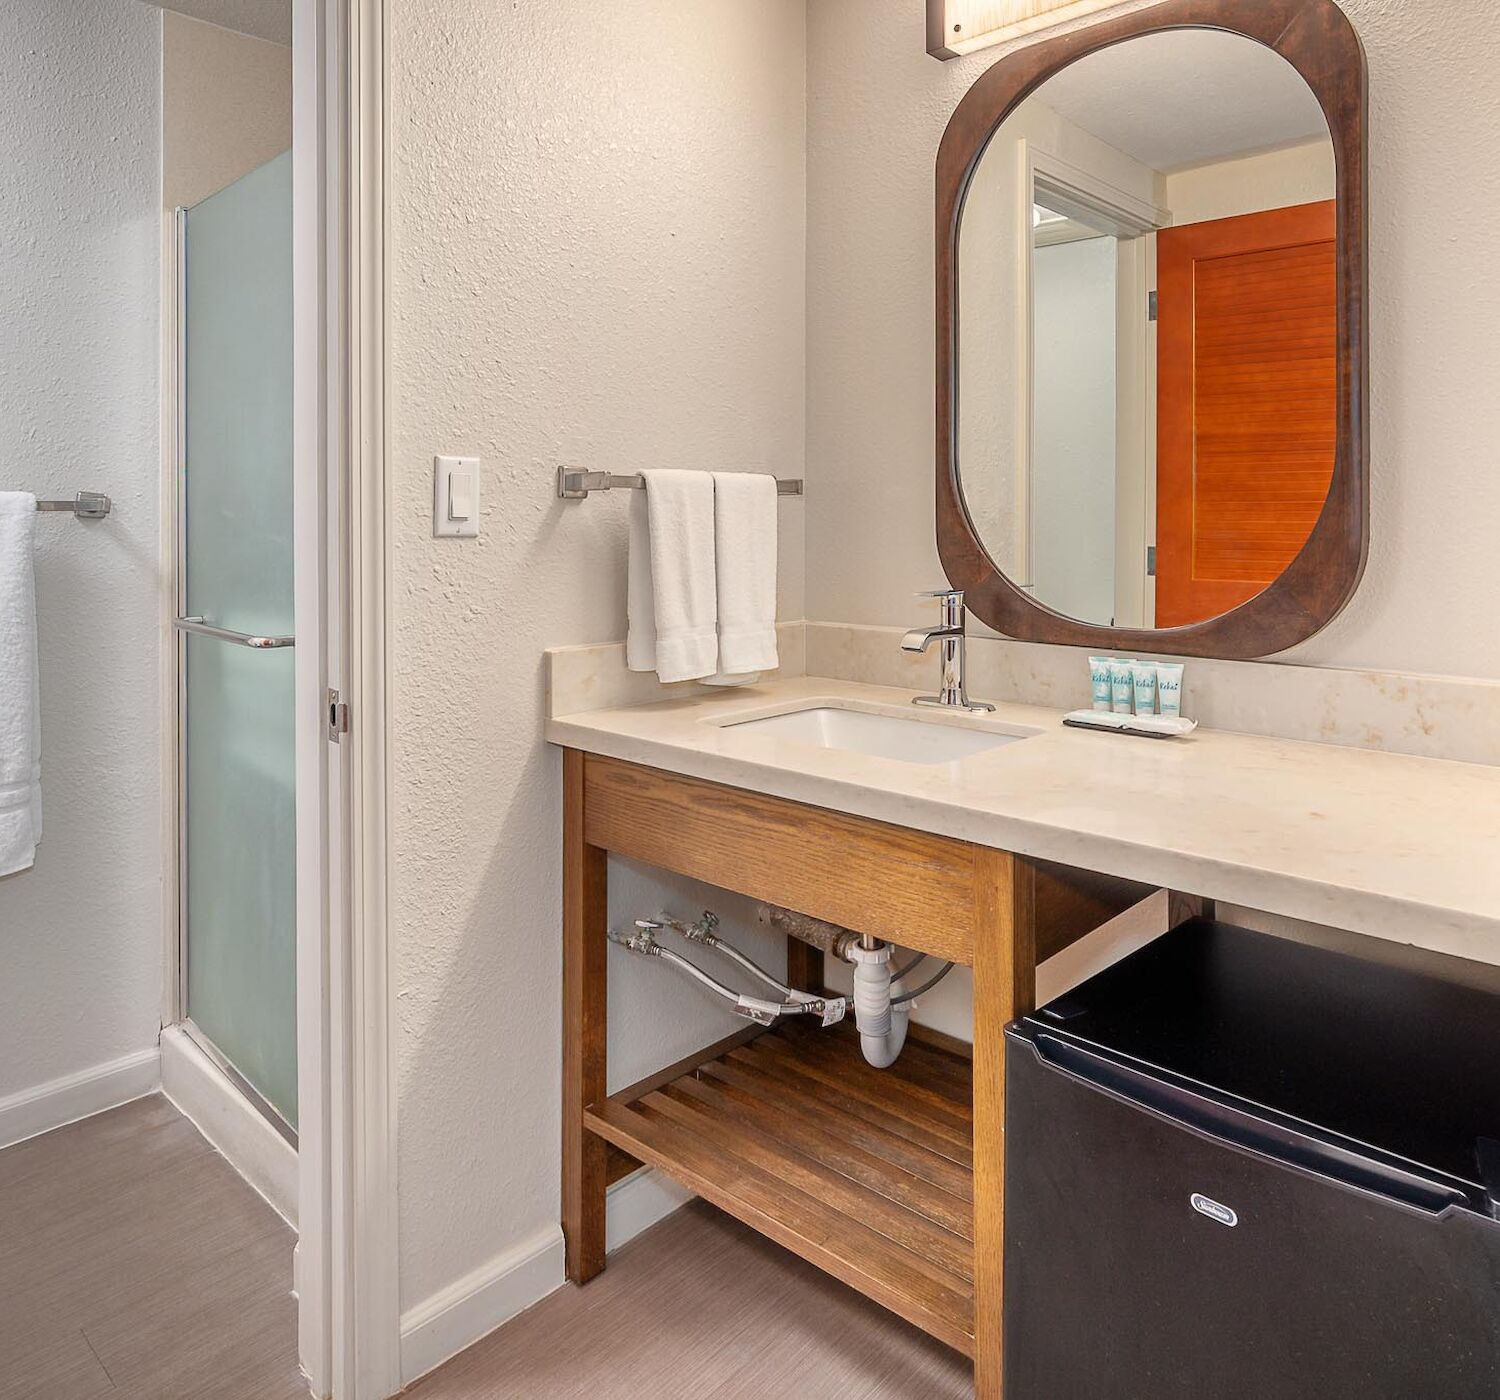 A bathroom with a vanity, mirror, sink, towels on a rack, small fridge, under-sink storage, and a shower separated by a glass door.